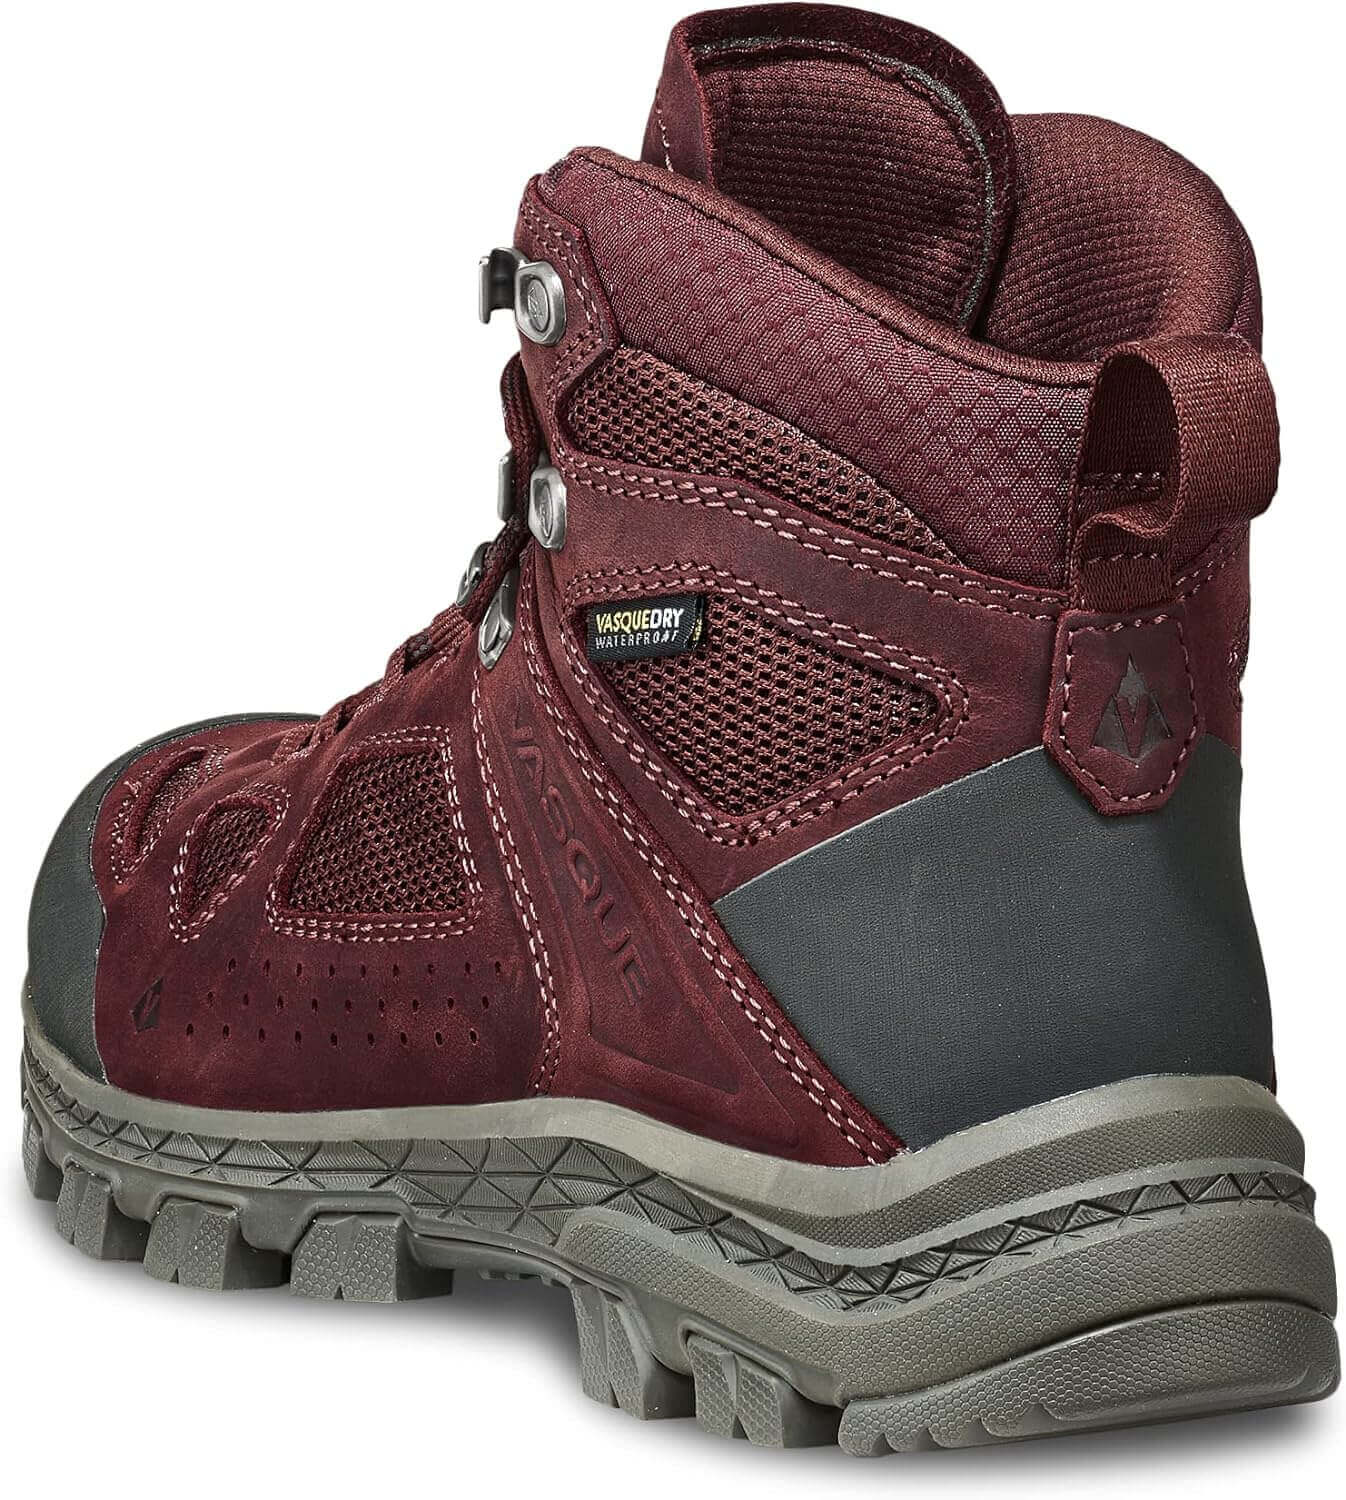 Shop The Latest >Vasque Women's Breeze Hiking Boots > *Only $216.00*> From The Top Brand > *Vasquel* > Shop Now and Get Free Shipping On Orders Over $45.00 >*Shop Earth Foot*